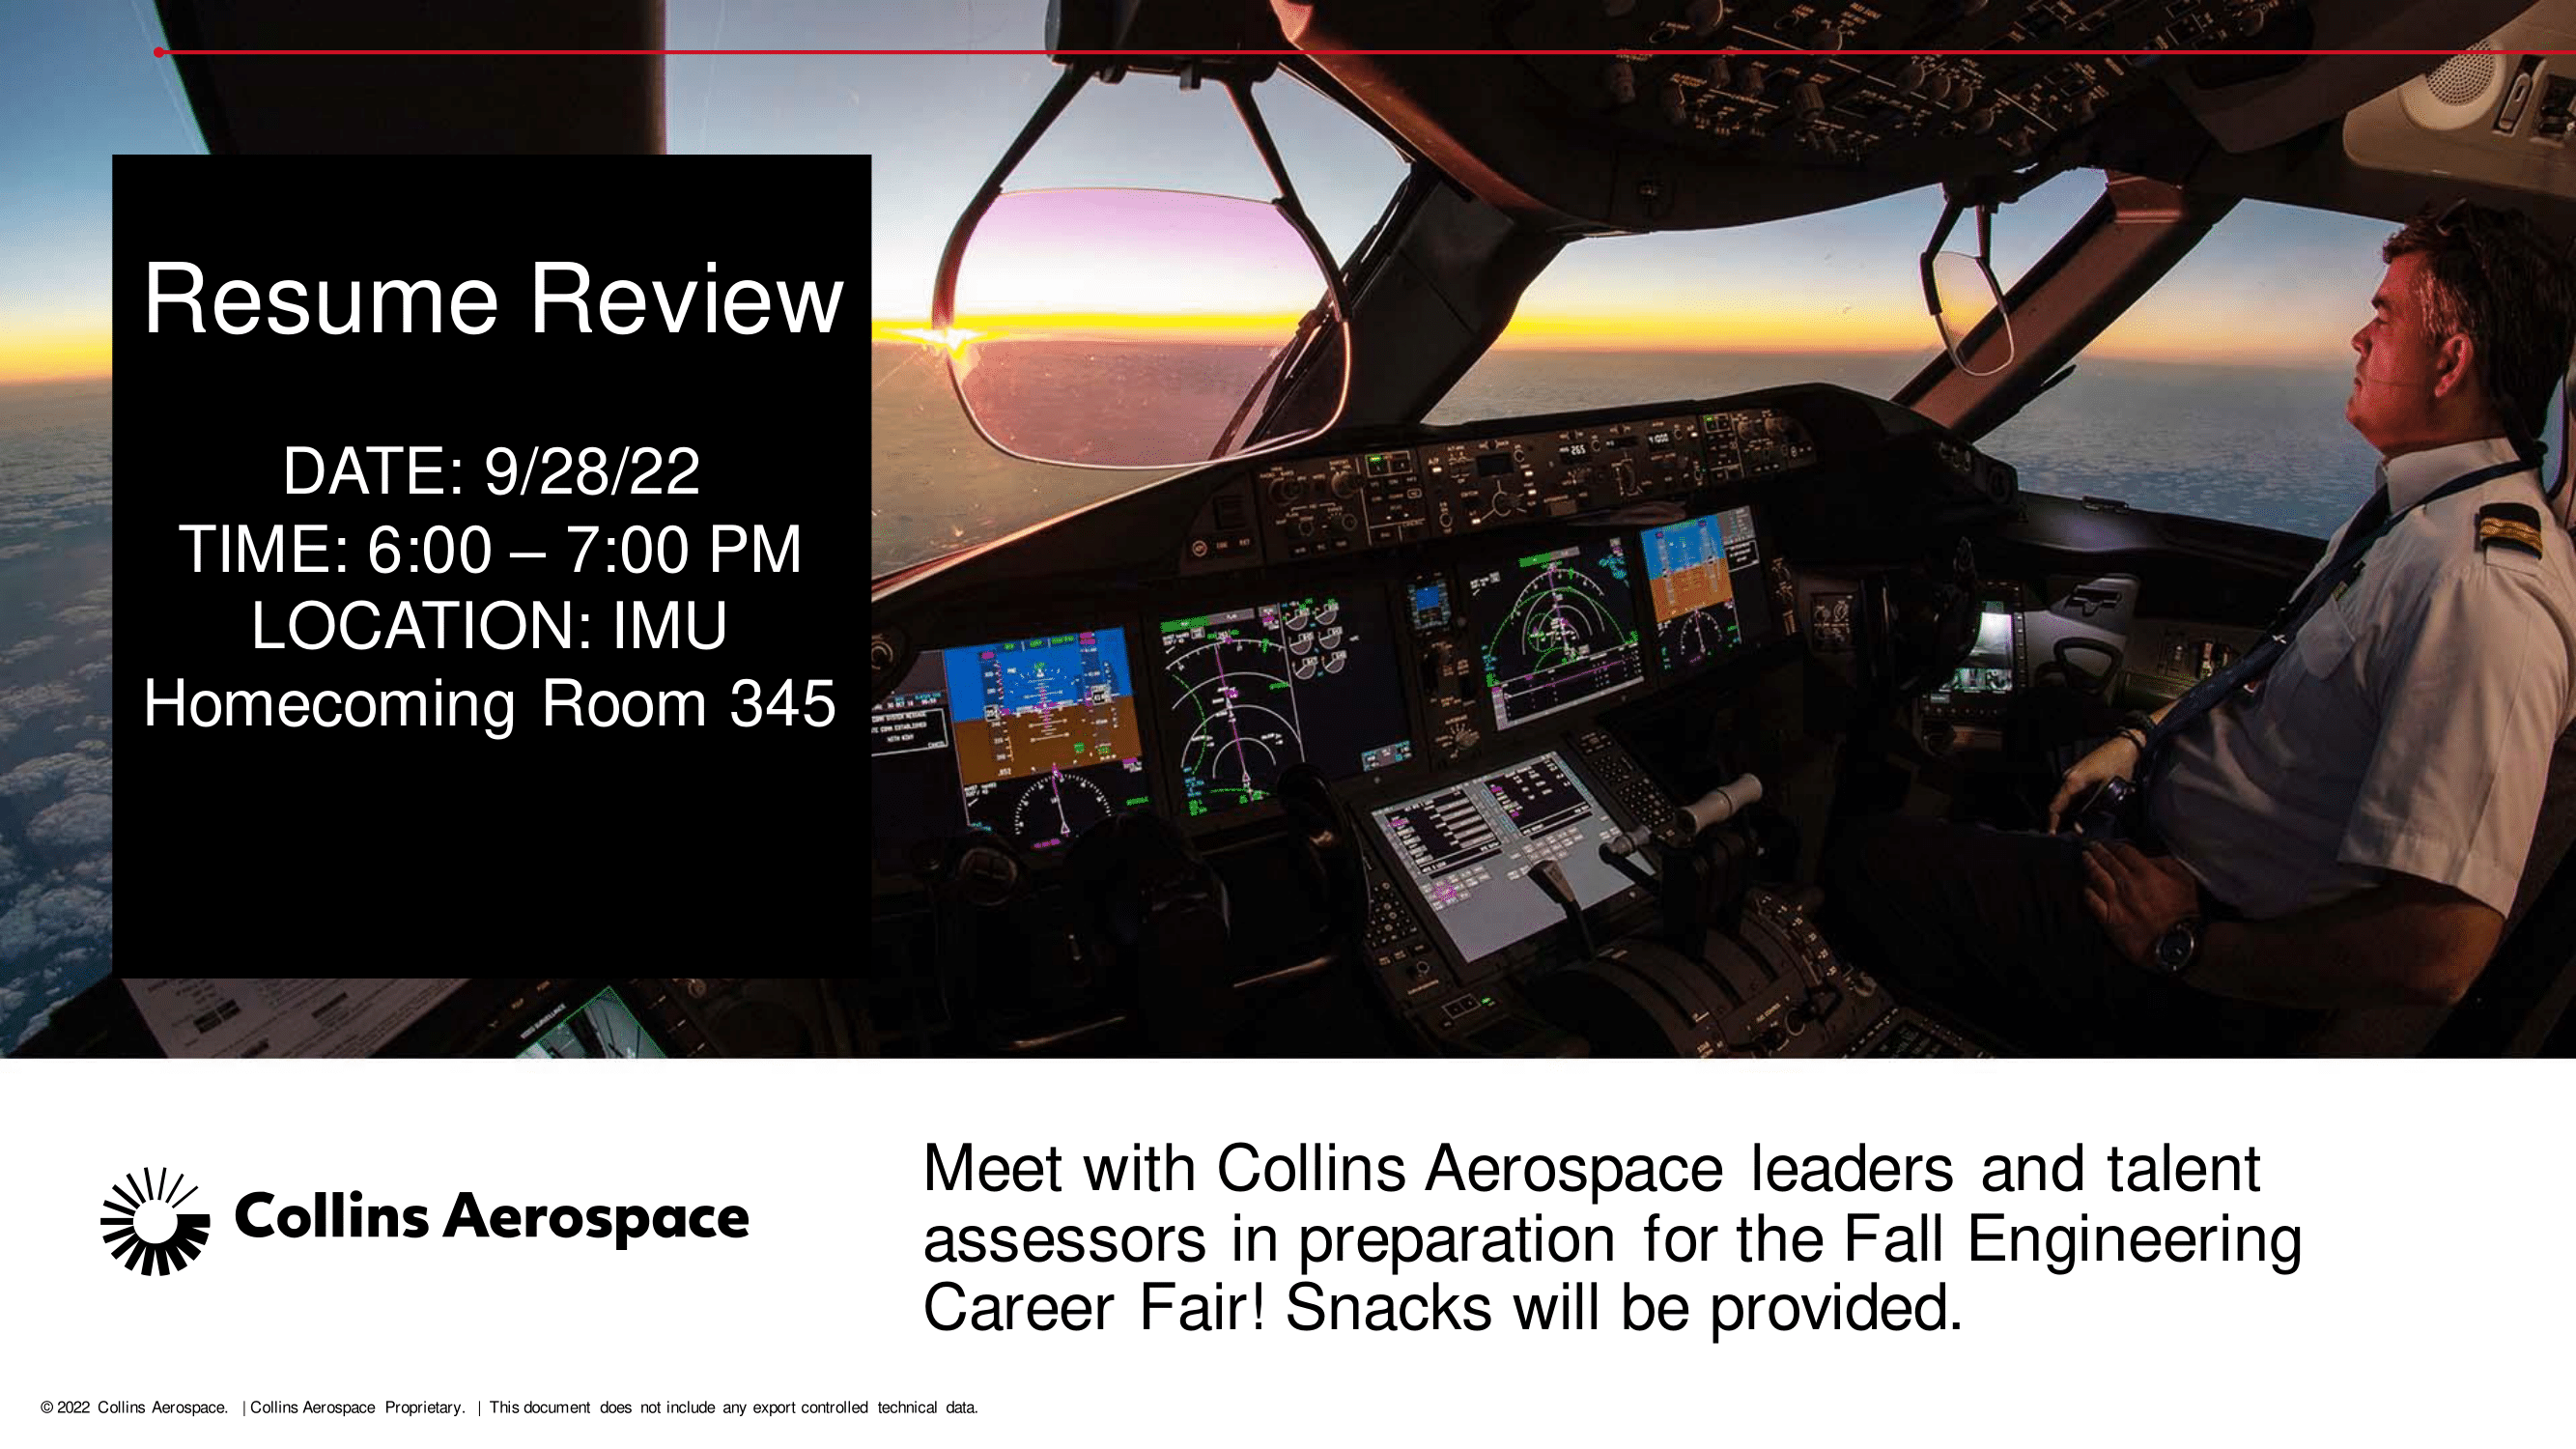 collins_aerospace_resume_review_sept_28-1.png